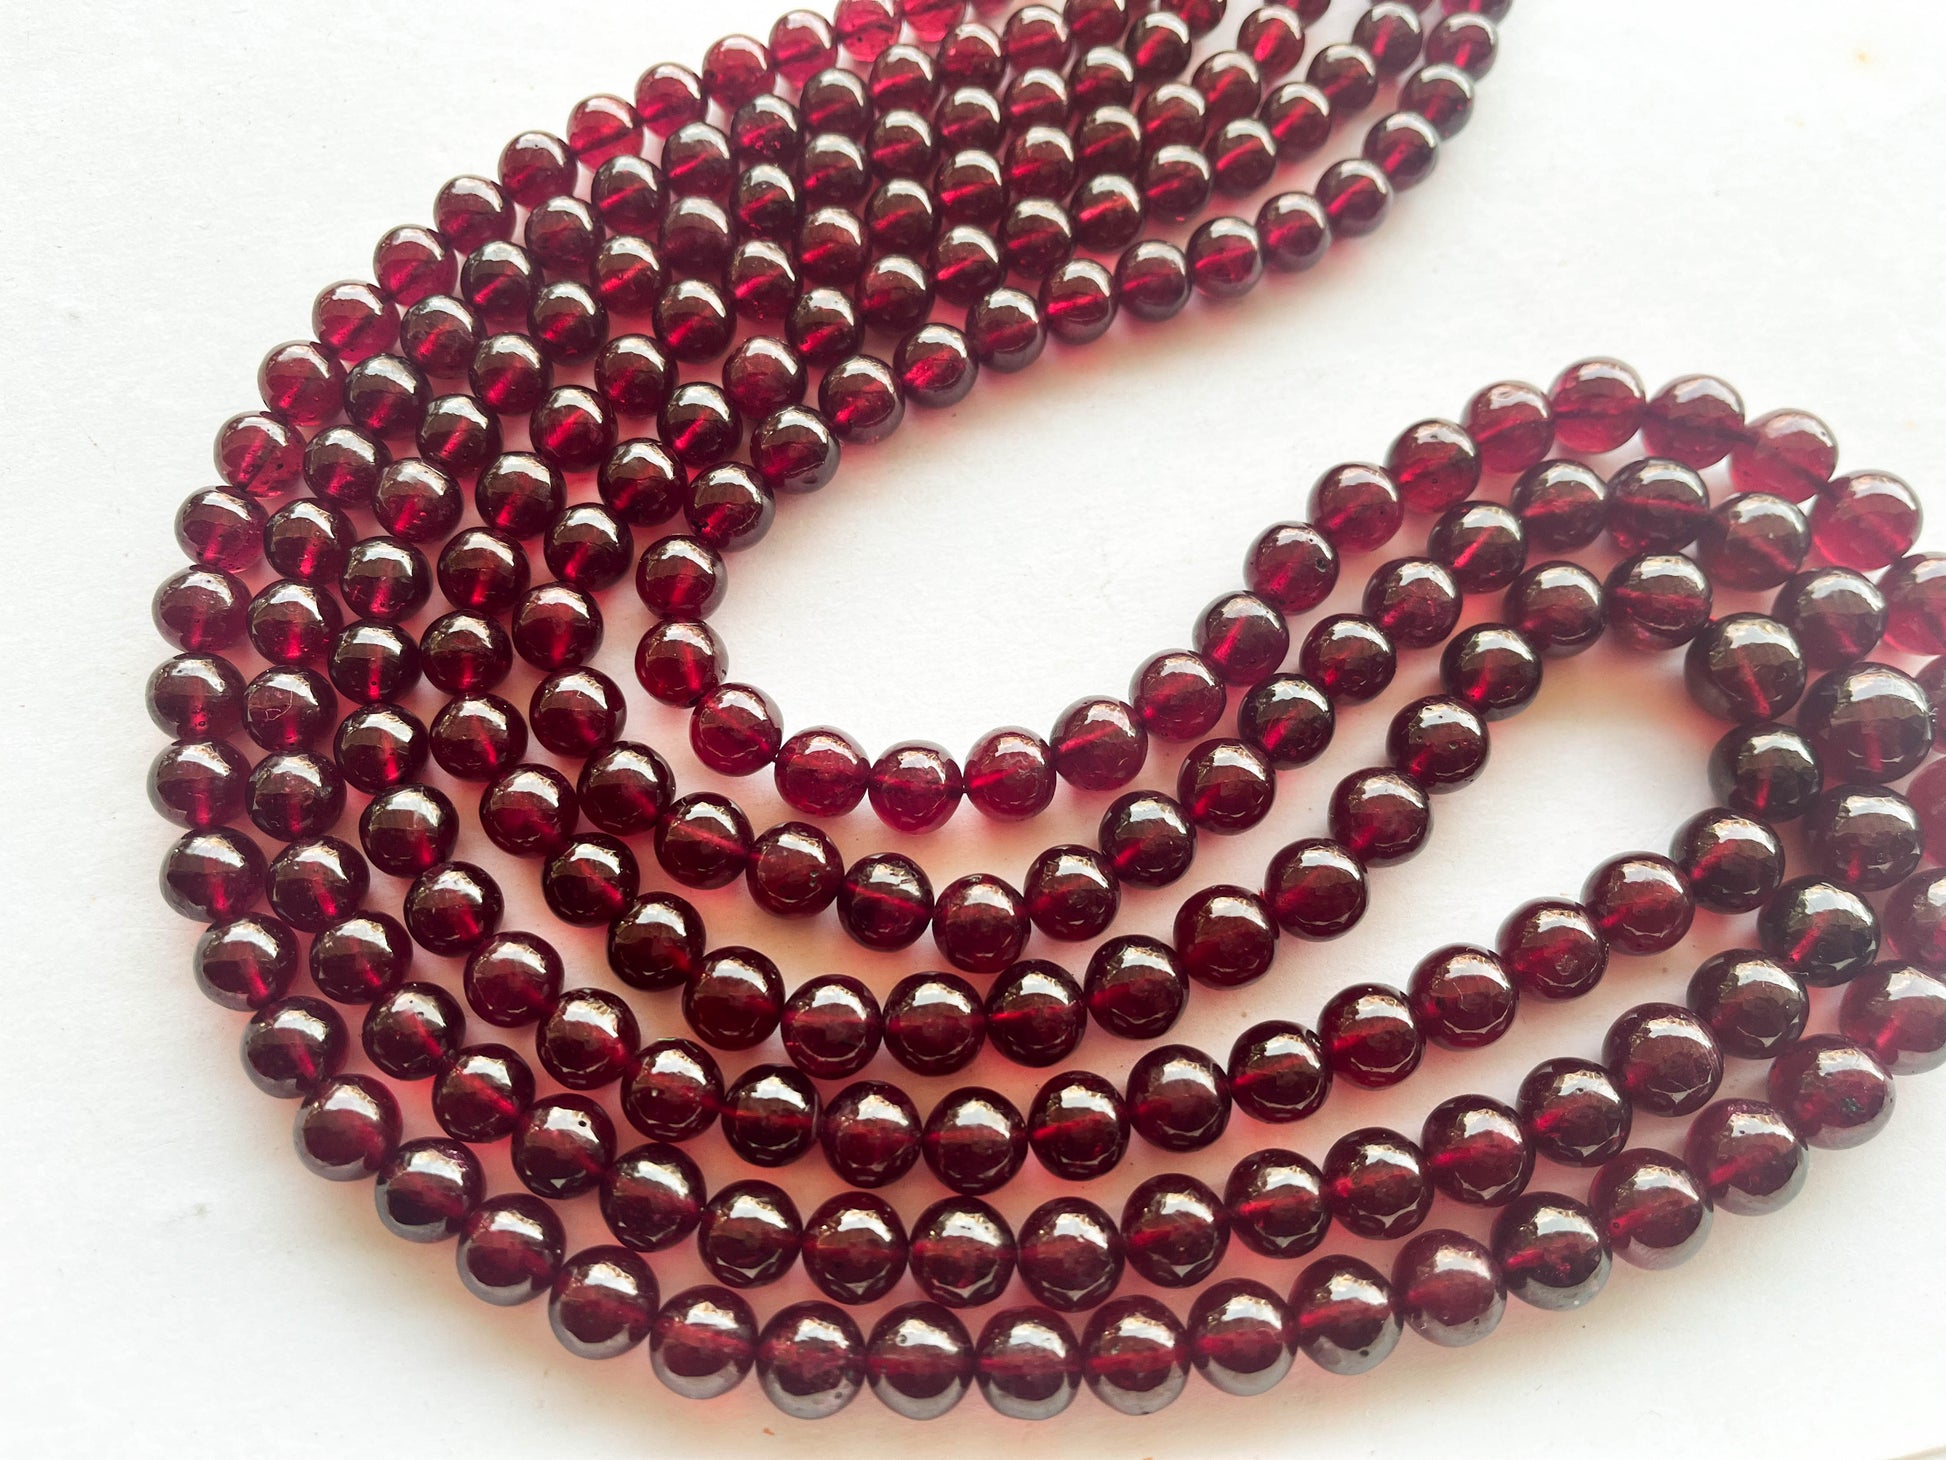 Natural Ruby Glass Filled Sphere Shape Beads | 21 Inch Beadsforyourjewelry